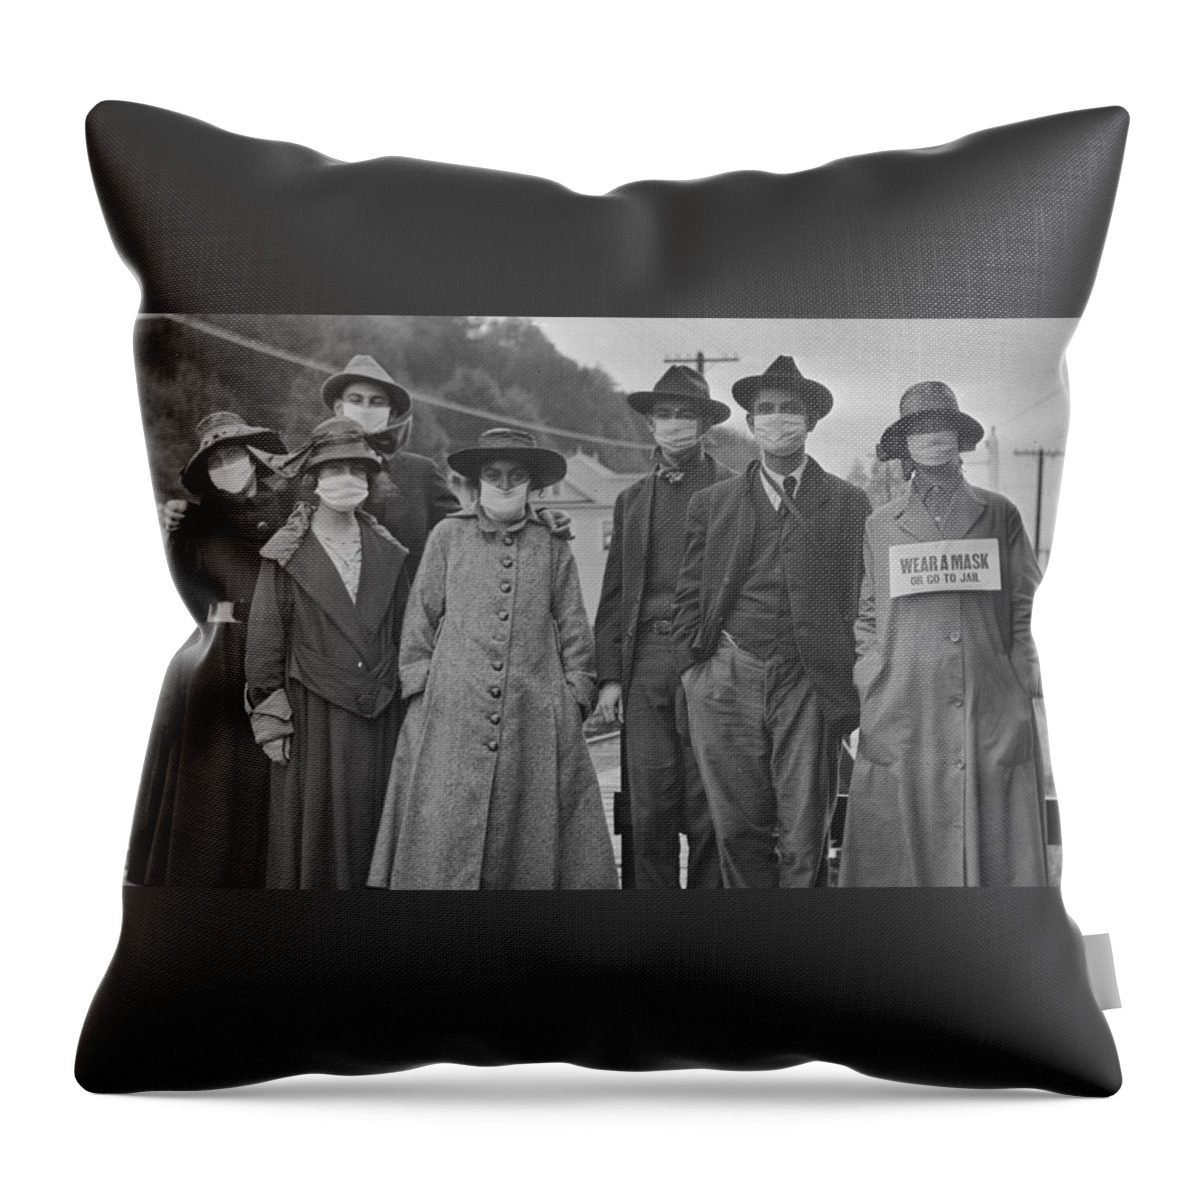 Pandemic Throw Pillow featuring the photograph Wear A Mask Spanish Flu 1918 by Bradford Martin